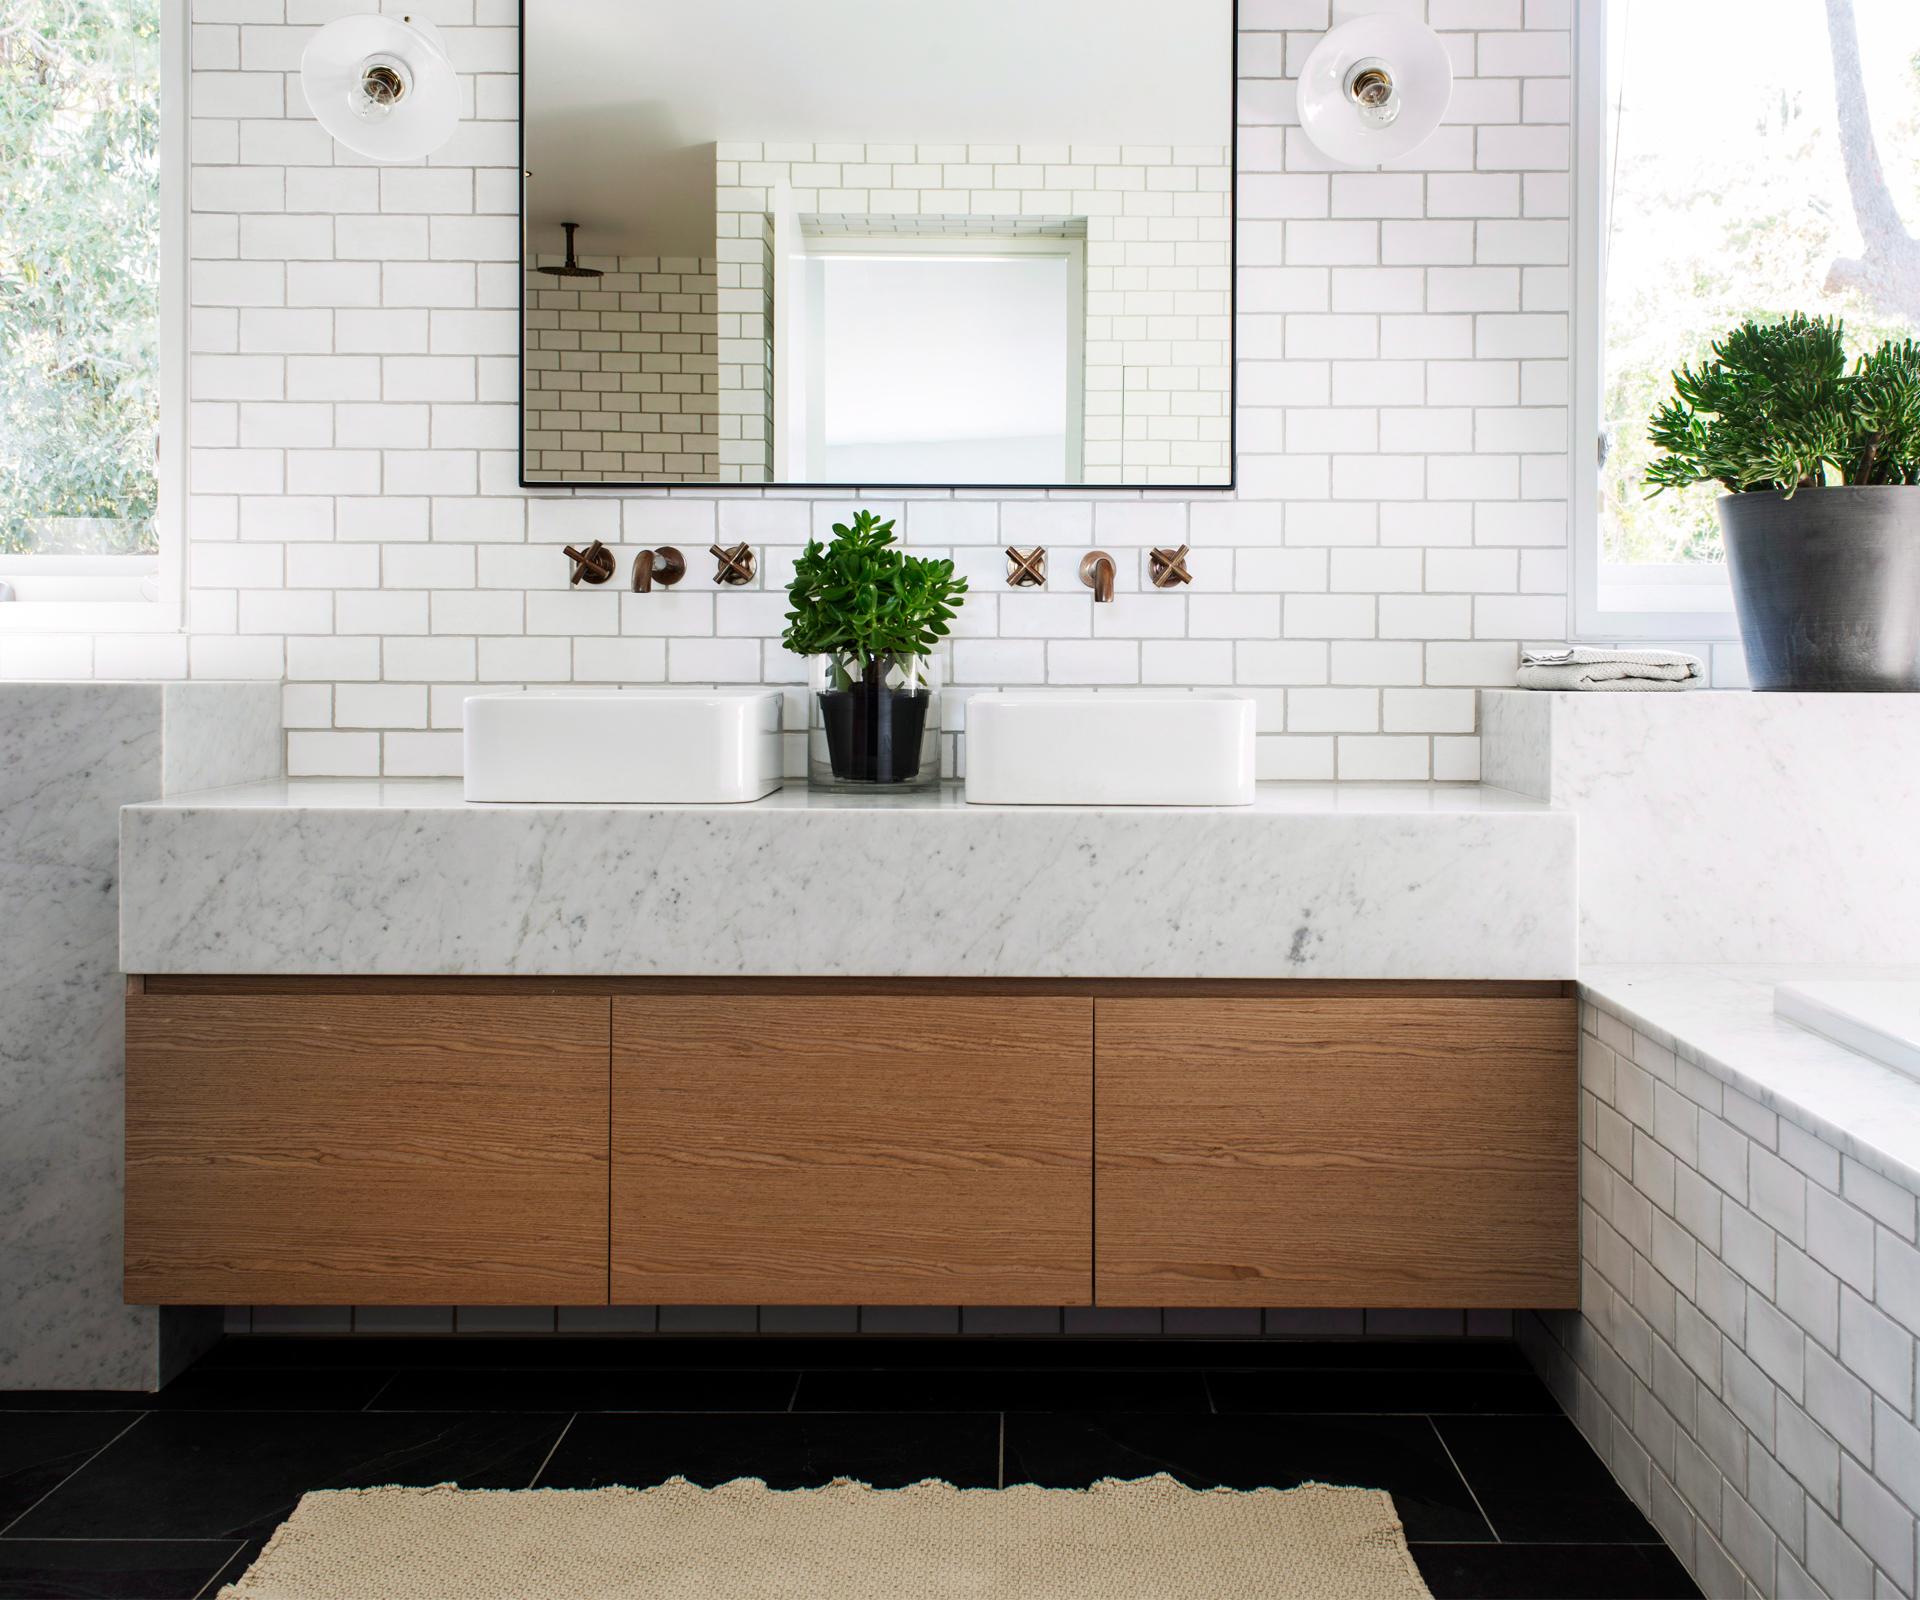 What to consider before tiling your bathroom